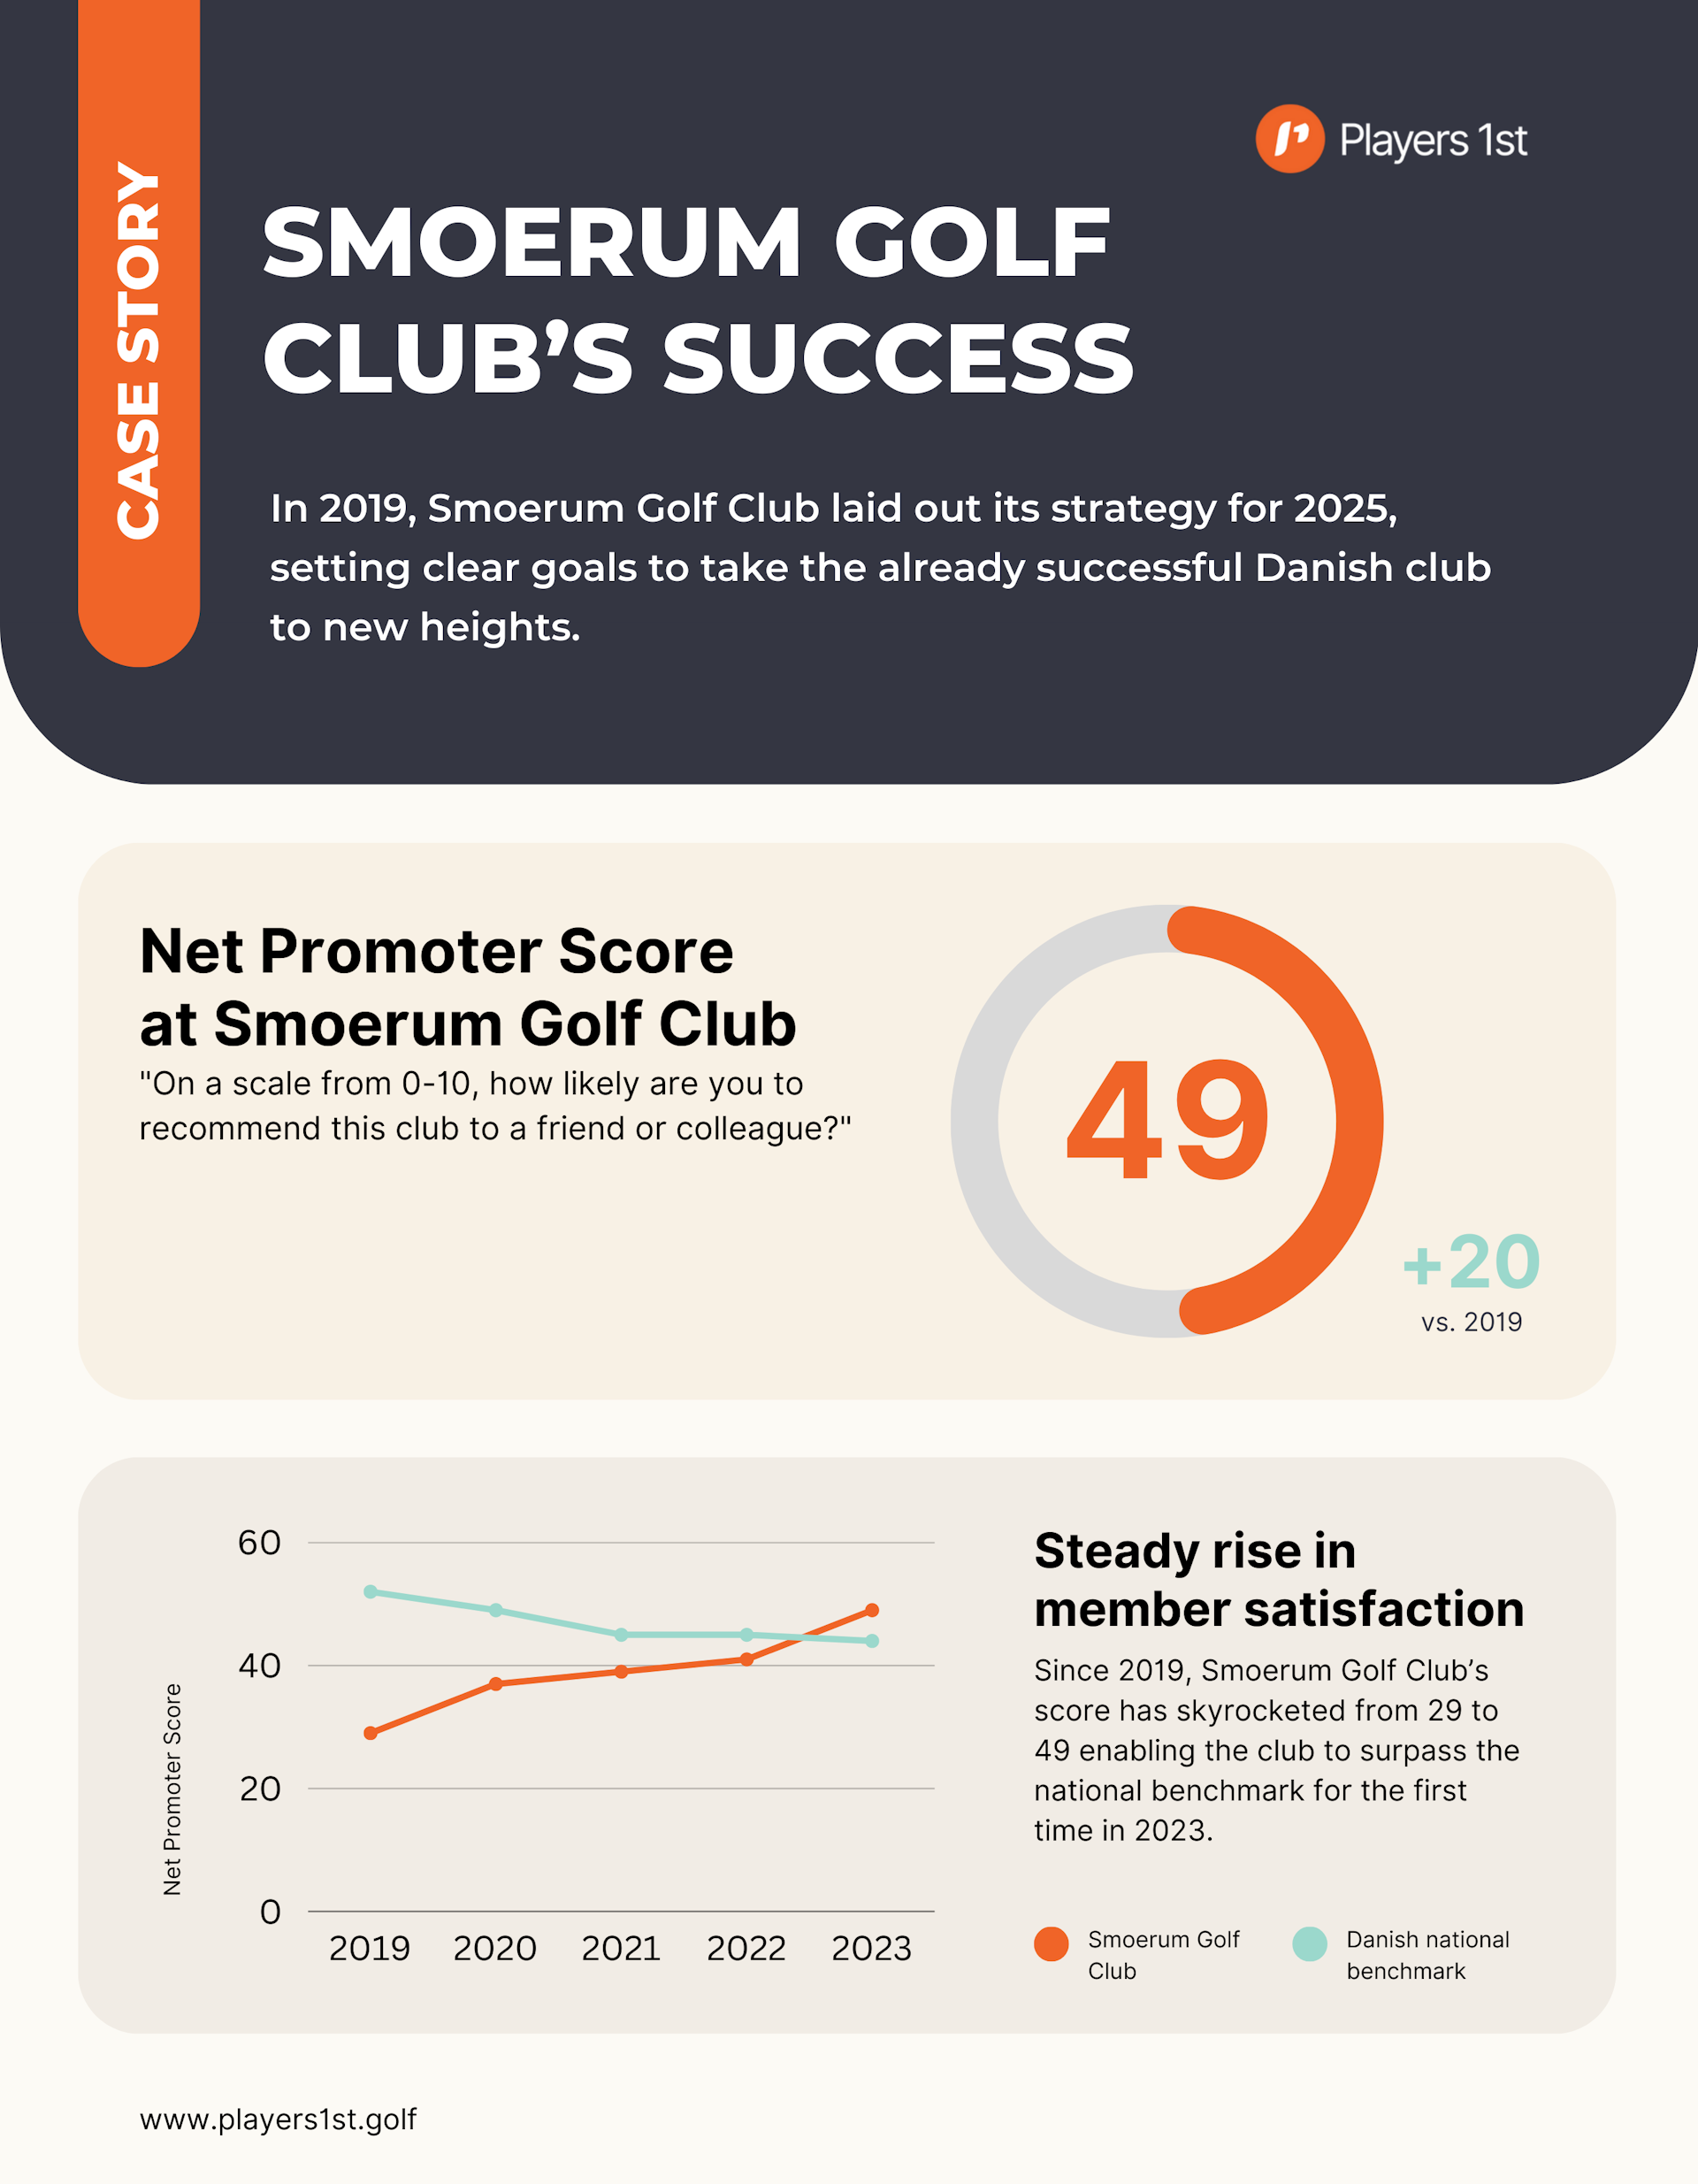 Smoerum Golf Club's success from 2019 to 2023.